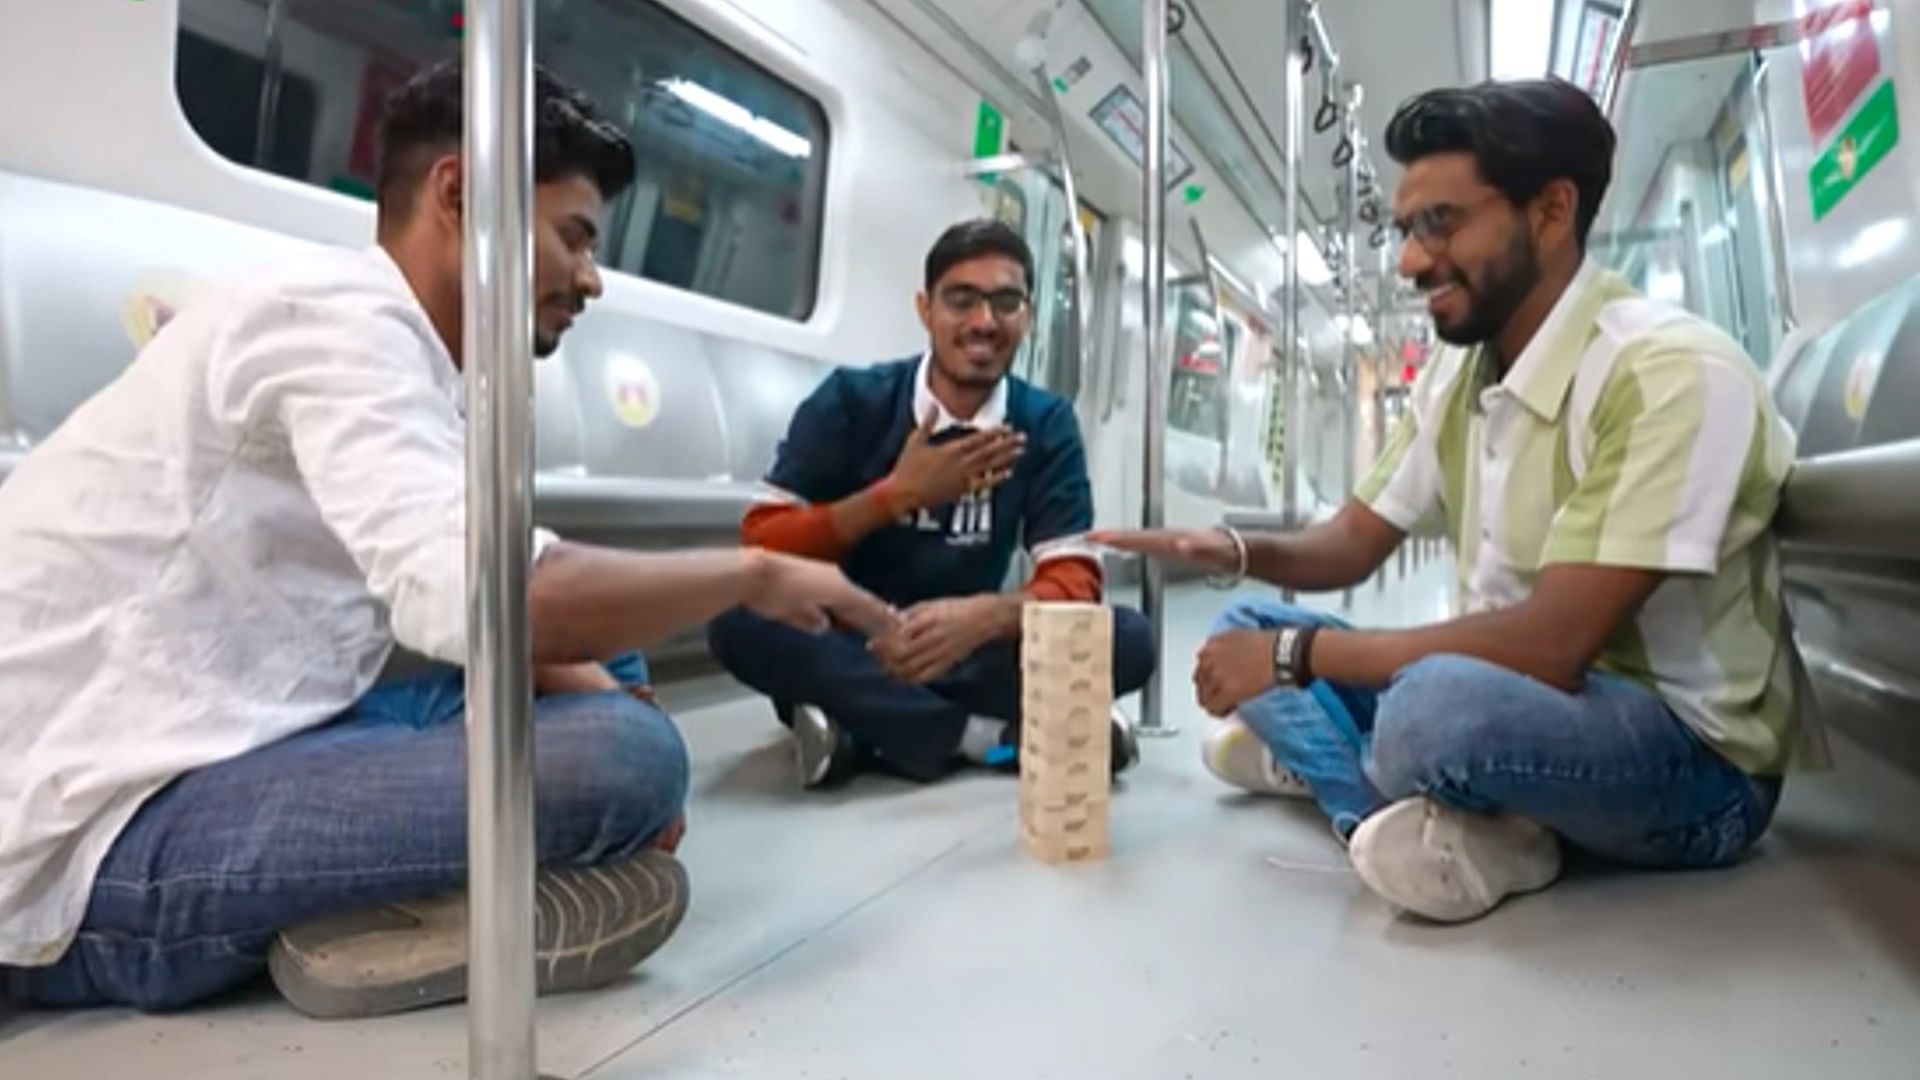 Six boys took a ride by booking the entire metro in middle of the night